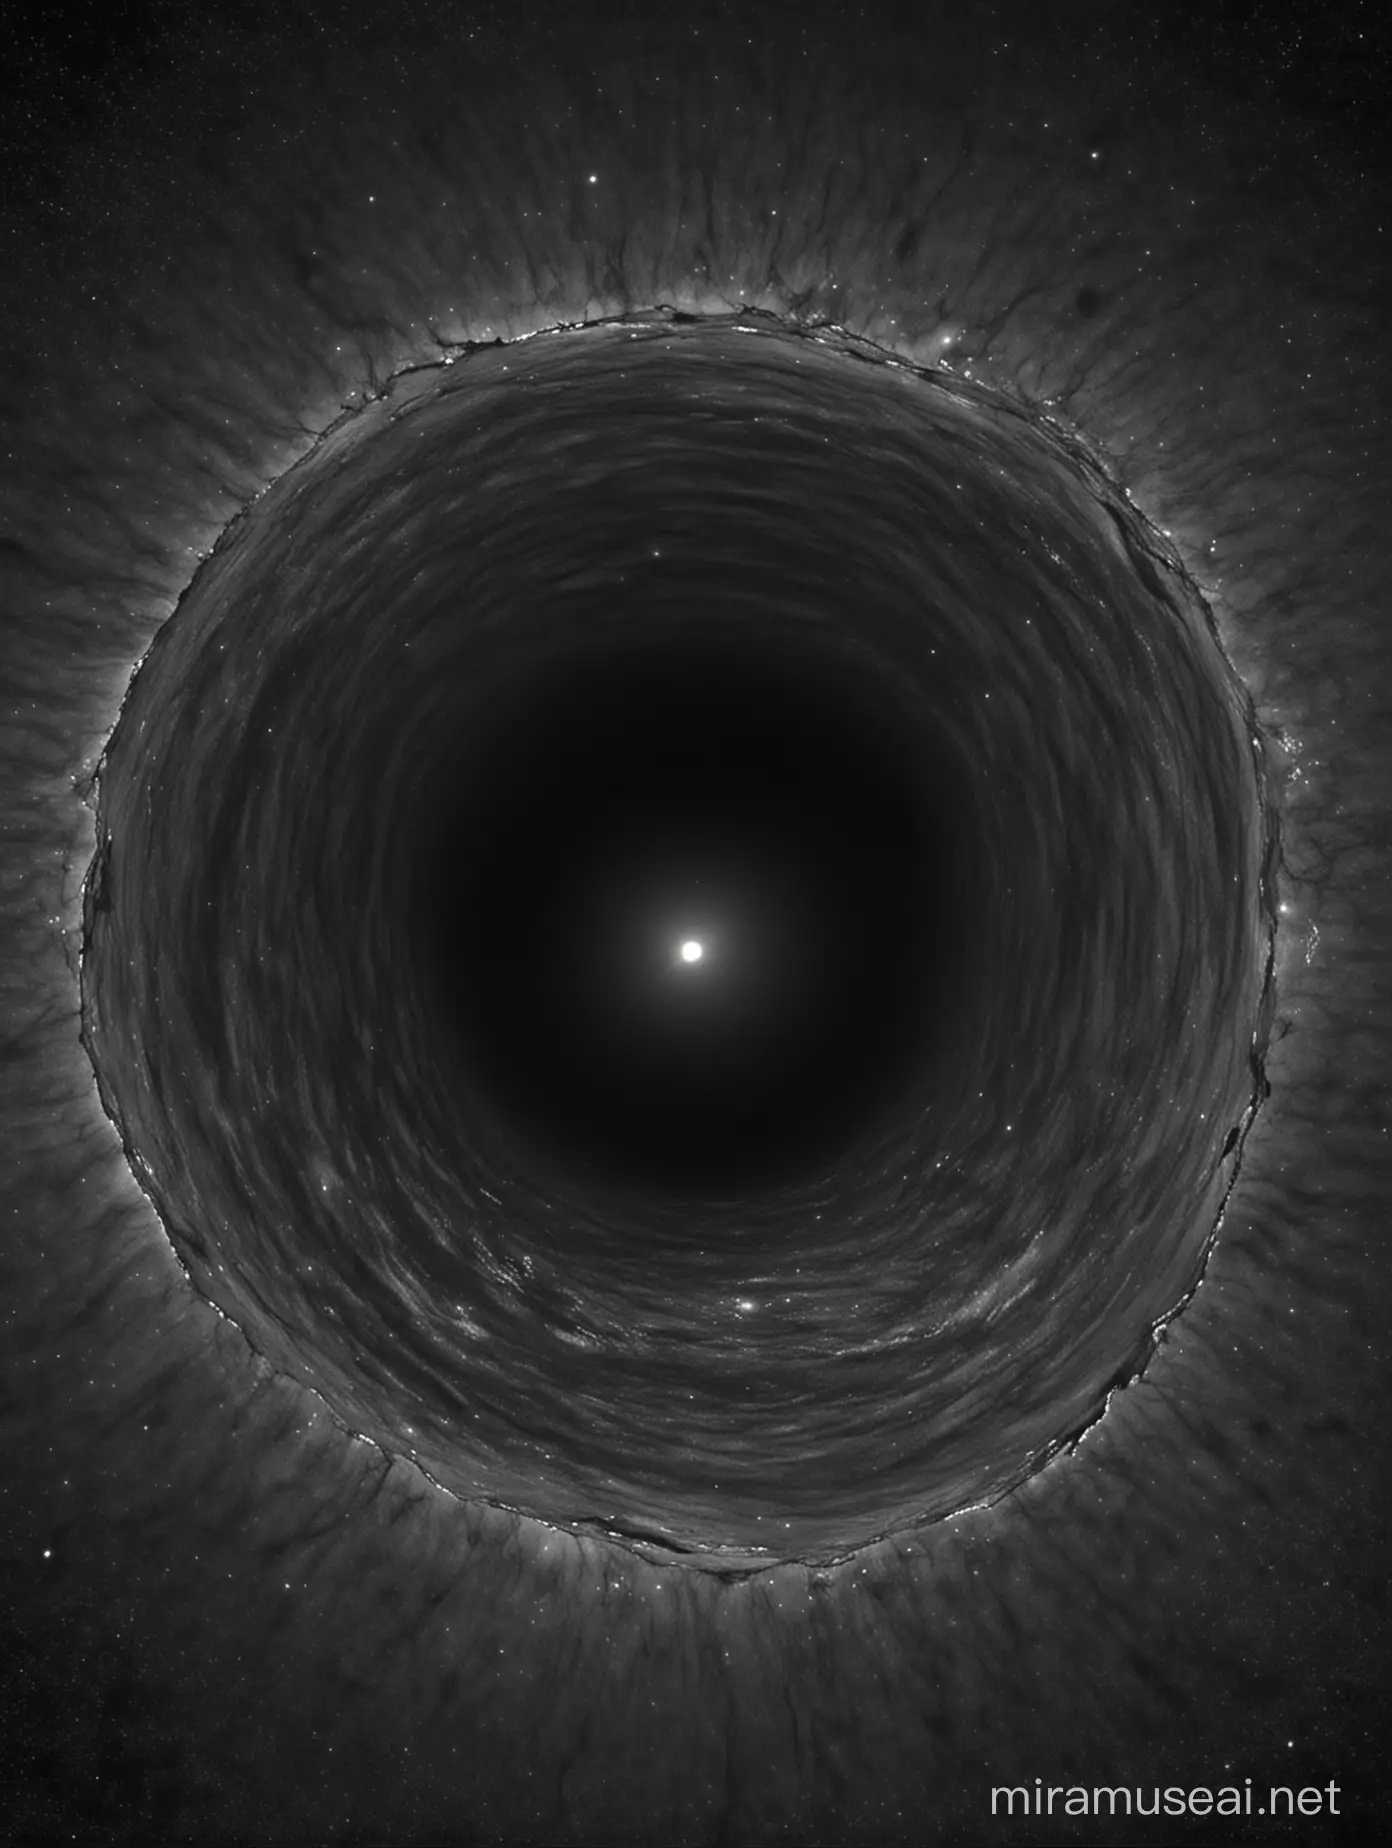 generate a detailed image of a blackhole